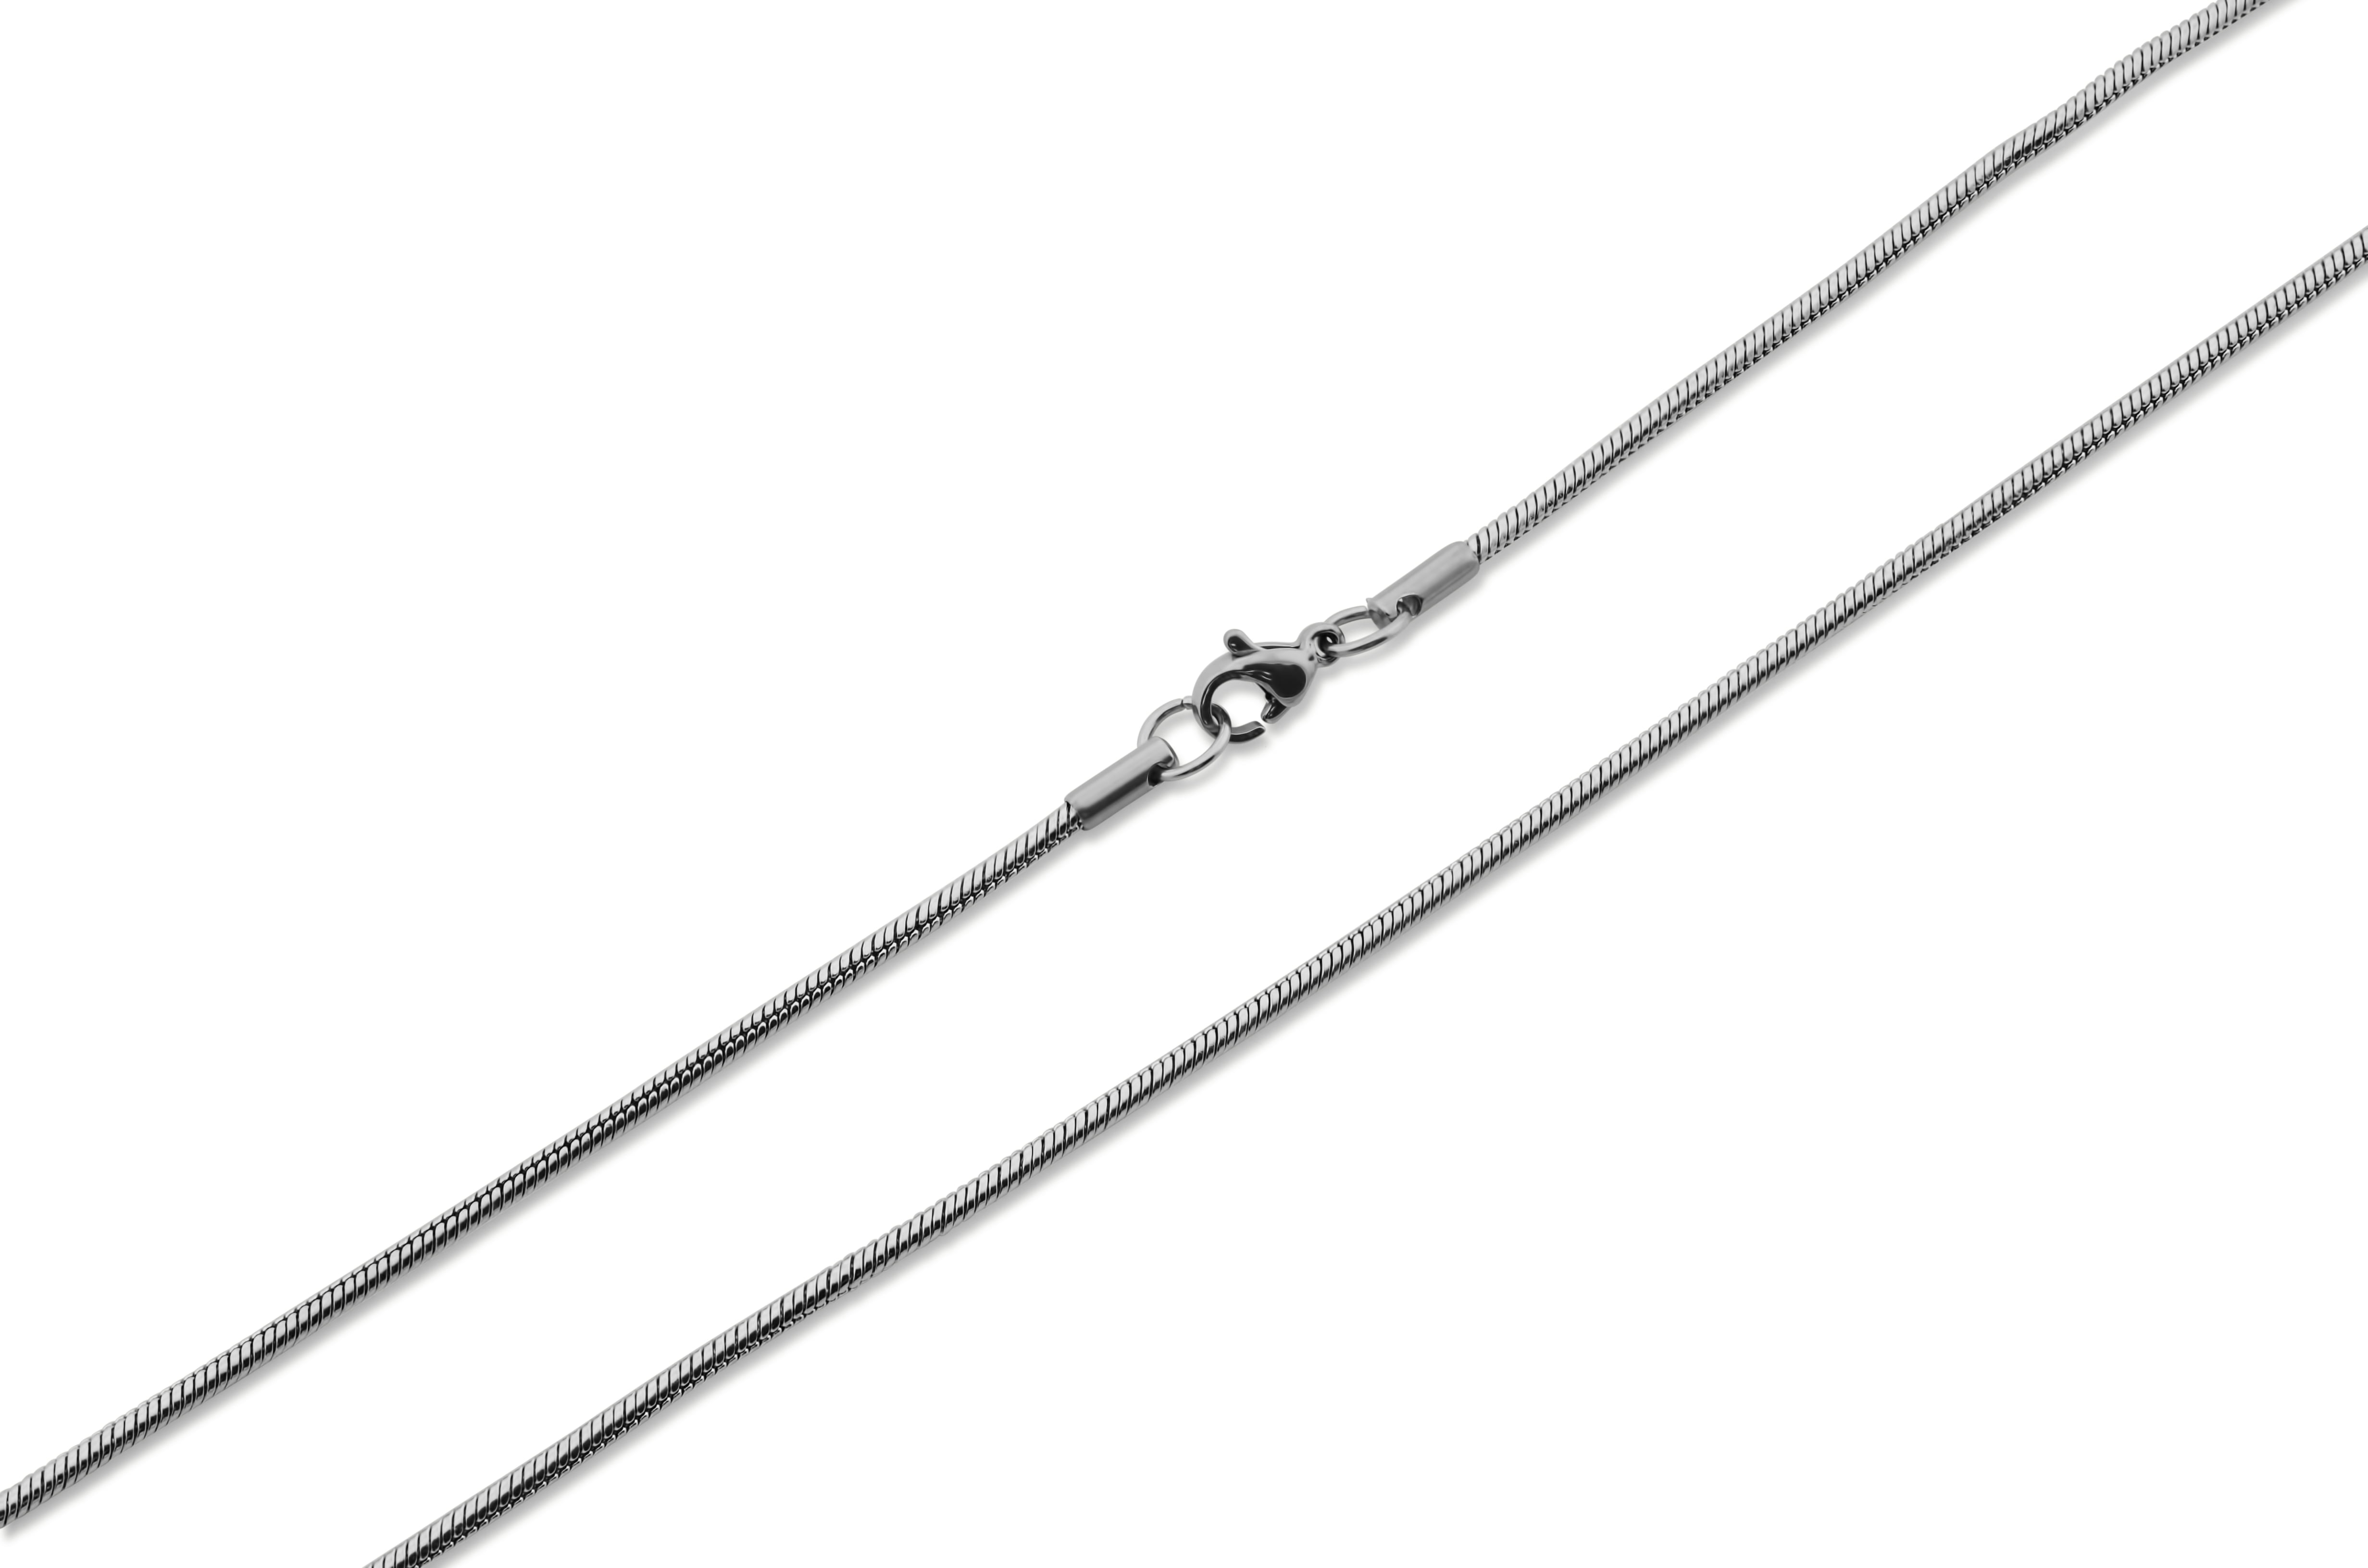 4/3/2MM Silver Tone Stylish 316L Stainless Steel Men's Boy's Necklace 18-36"